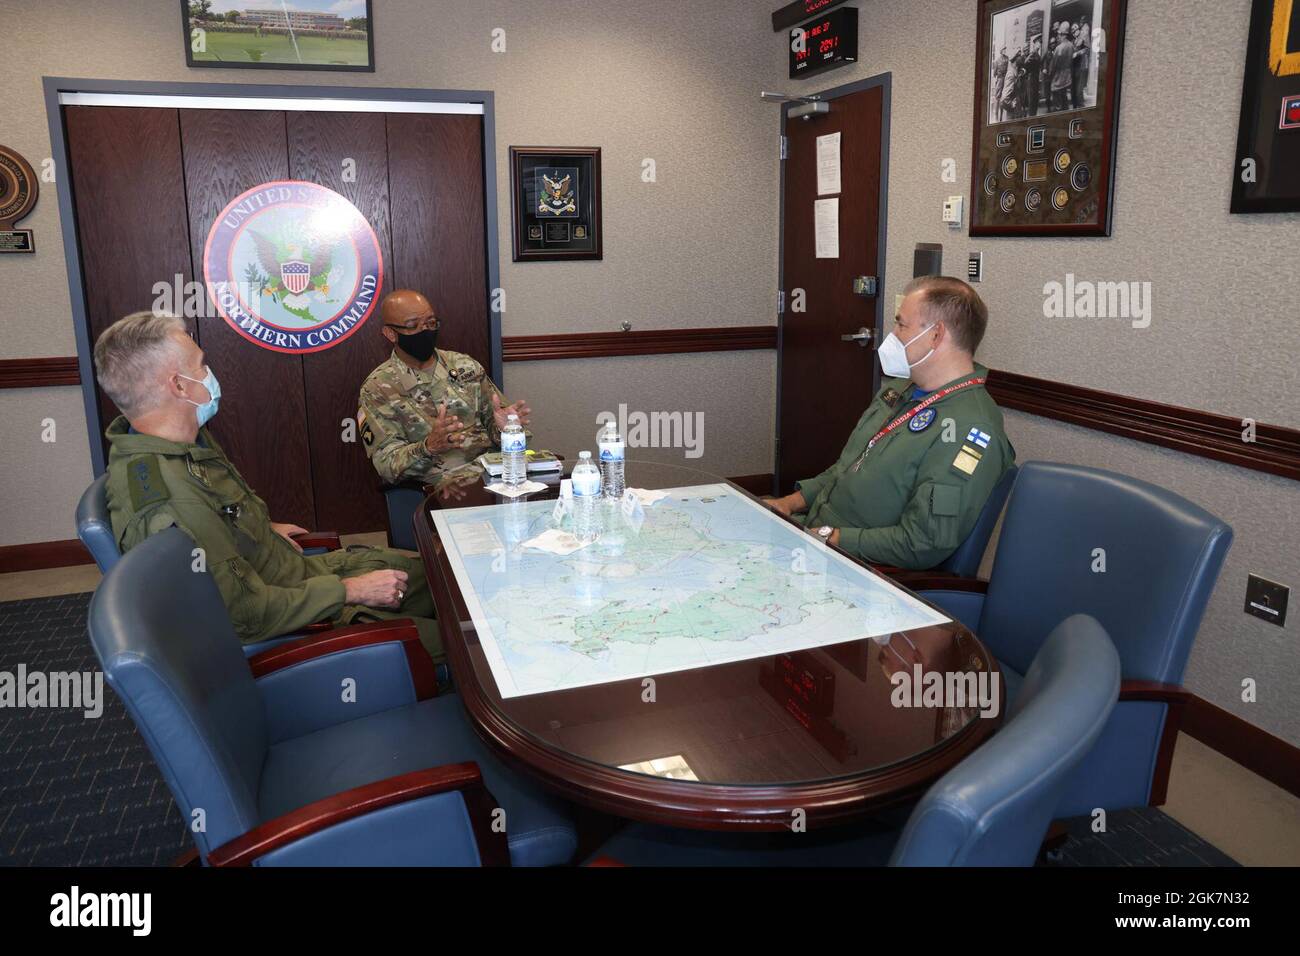 Canadian MGen. Patrick Carpentier, Director, North American Aerospace Defense Command Operations (Left), and U.S. Army Lt. Gen. A.C. Roper, Deputy Commander, U.S. Northern Command (Center), speak with Maj. Gen. Pasi Jokinen, Finnish Air Force Commander (Right), in the NORAD and USNORTHCOM headquarters in Colorado Springs, Colorado, Aug 27, 2021.  The leaders discussed NORAD’s mission, objectives and capabilities, as well as the United States perspective on Arctic strategy. (Department of Defense photo by Mr. Jhomil Bansil) Stock Photo